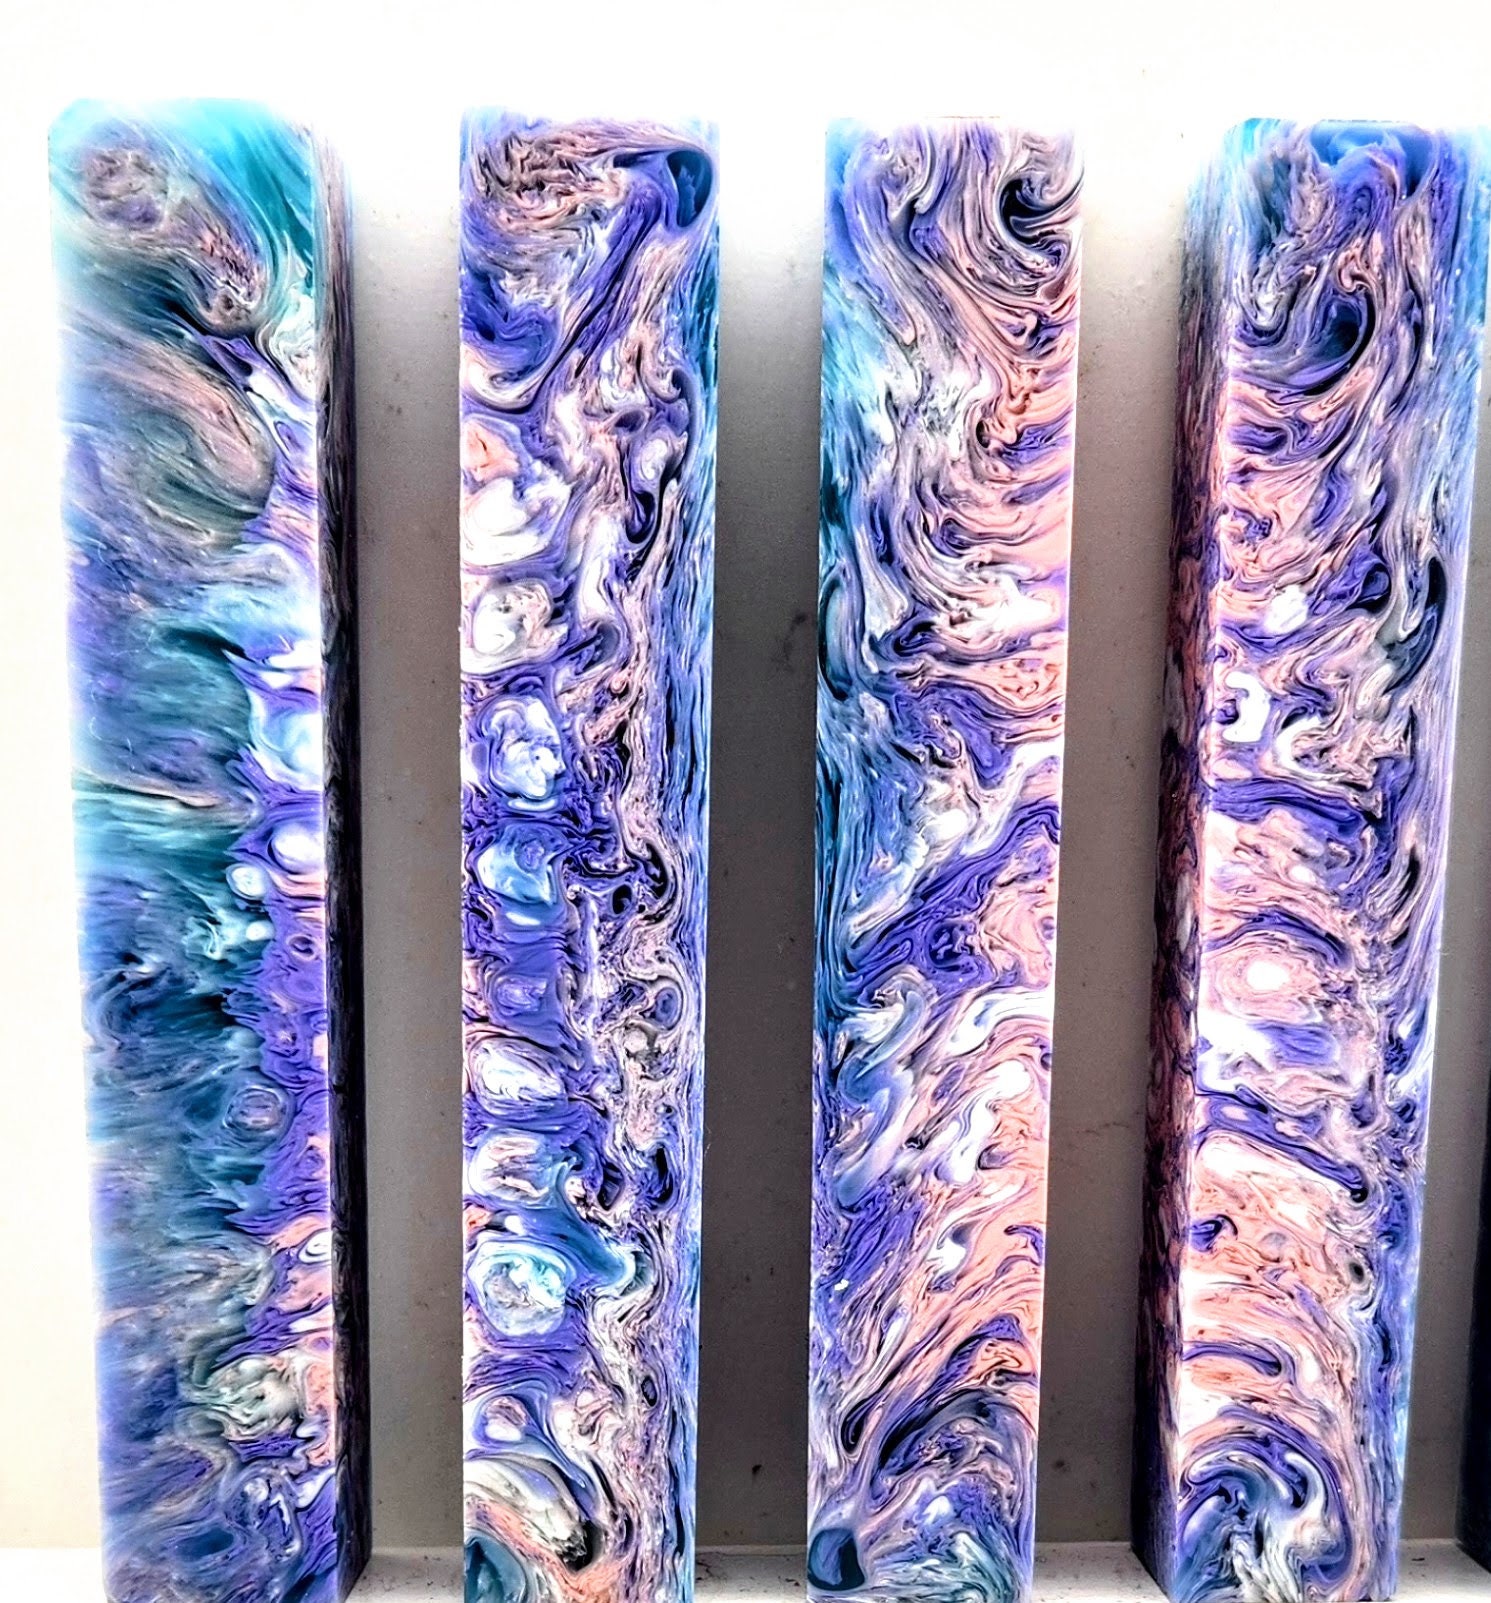 Resin Diamond Painting Pens.diy Diamond Art Pen.each Pen Includes 4 Tips  and 1 Correction Plate.diamond Painting Accessories. 